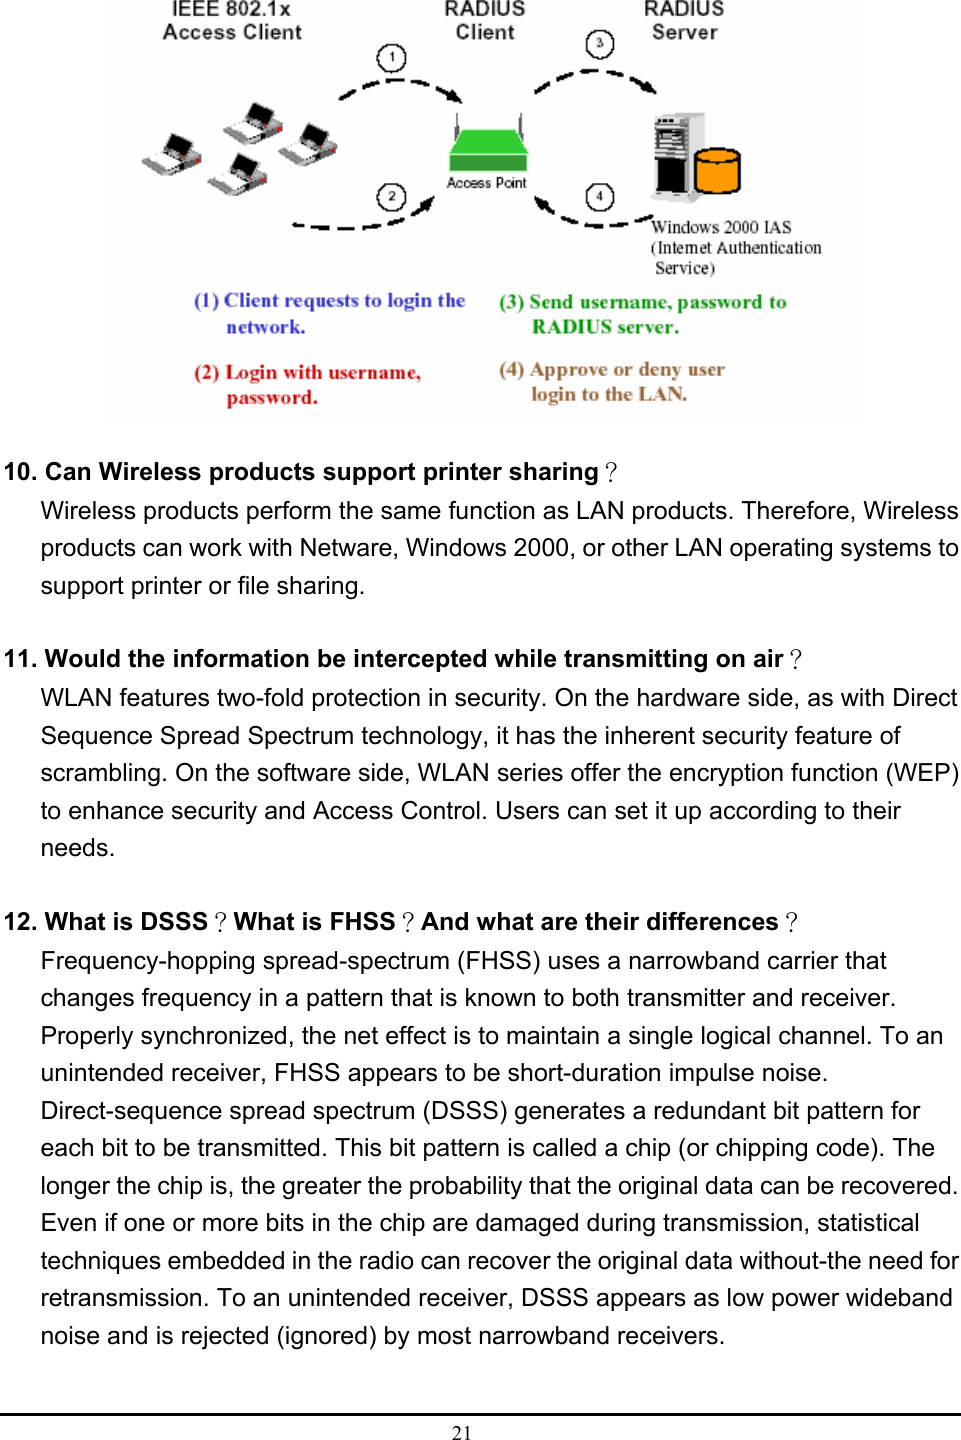  21   10. Can Wireless products support printer sharing？ Wireless products perform the same function as LAN products. Therefore, Wireless products can work with Netware, Windows 2000, or other LAN operating systems to support printer or file sharing.  11. Would the information be intercepted while transmitting on air？ WLAN features two-fold protection in security. On the hardware side, as with Direct Sequence Spread Spectrum technology, it has the inherent security feature of scrambling. On the software side, WLAN series offer the encryption function (WEP) to enhance security and Access Control. Users can set it up according to their needs.  12. What is DSSS？What is FHSS？And what are their differences？ Frequency-hopping spread-spectrum (FHSS) uses a narrowband carrier that changes frequency in a pattern that is known to both transmitter and receiver. Properly synchronized, the net effect is to maintain a single logical channel. To an unintended receiver, FHSS appears to be short-duration impulse noise. Direct-sequence spread spectrum (DSSS) generates a redundant bit pattern for each bit to be transmitted. This bit pattern is called a chip (or chipping code). The longer the chip is, the greater the probability that the original data can be recovered. Even if one or more bits in the chip are damaged during transmission, statistical techniques embedded in the radio can recover the original data without-the need for retransmission. To an unintended receiver, DSSS appears as low power wideband noise and is rejected (ignored) by most narrowband receivers.  